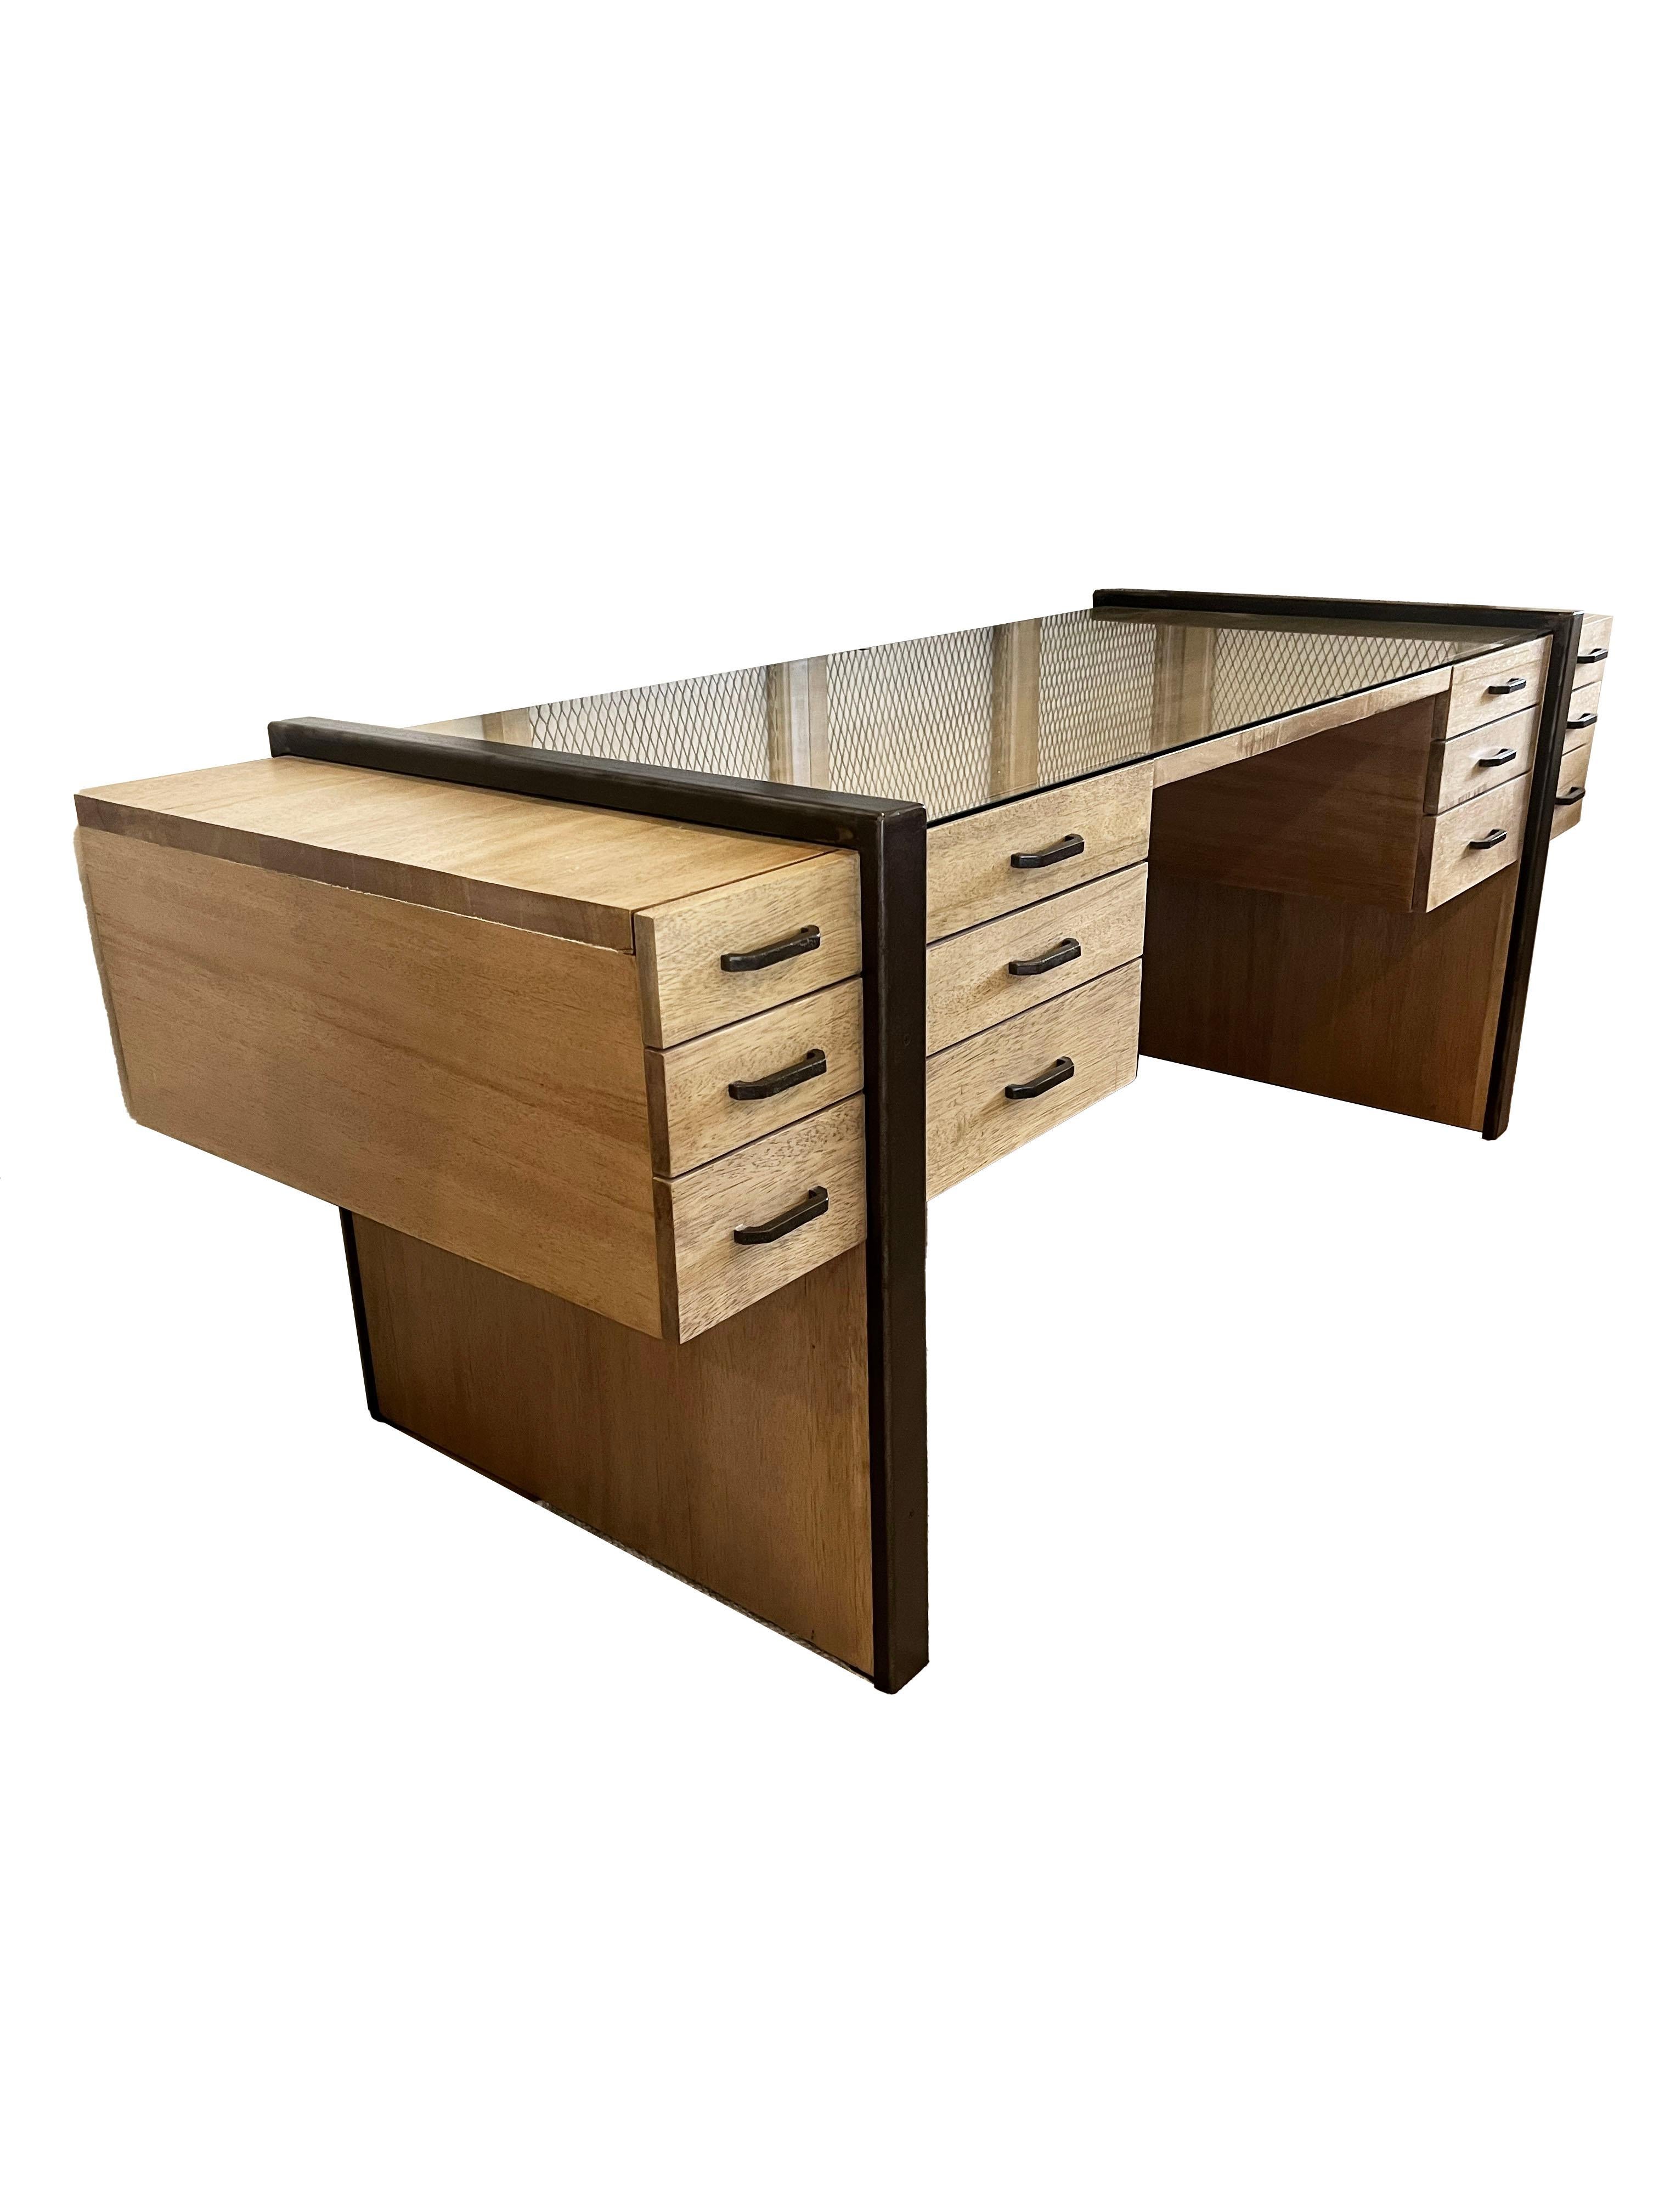 Modern Washed Walnut Desk by Noir Furniture. Boasting a unique and stunning silhouette, this desk features twelve drawers on glides, each adorned with hammered iron drawer pulls, adding a touch of industrial charm to its sleek profile. The